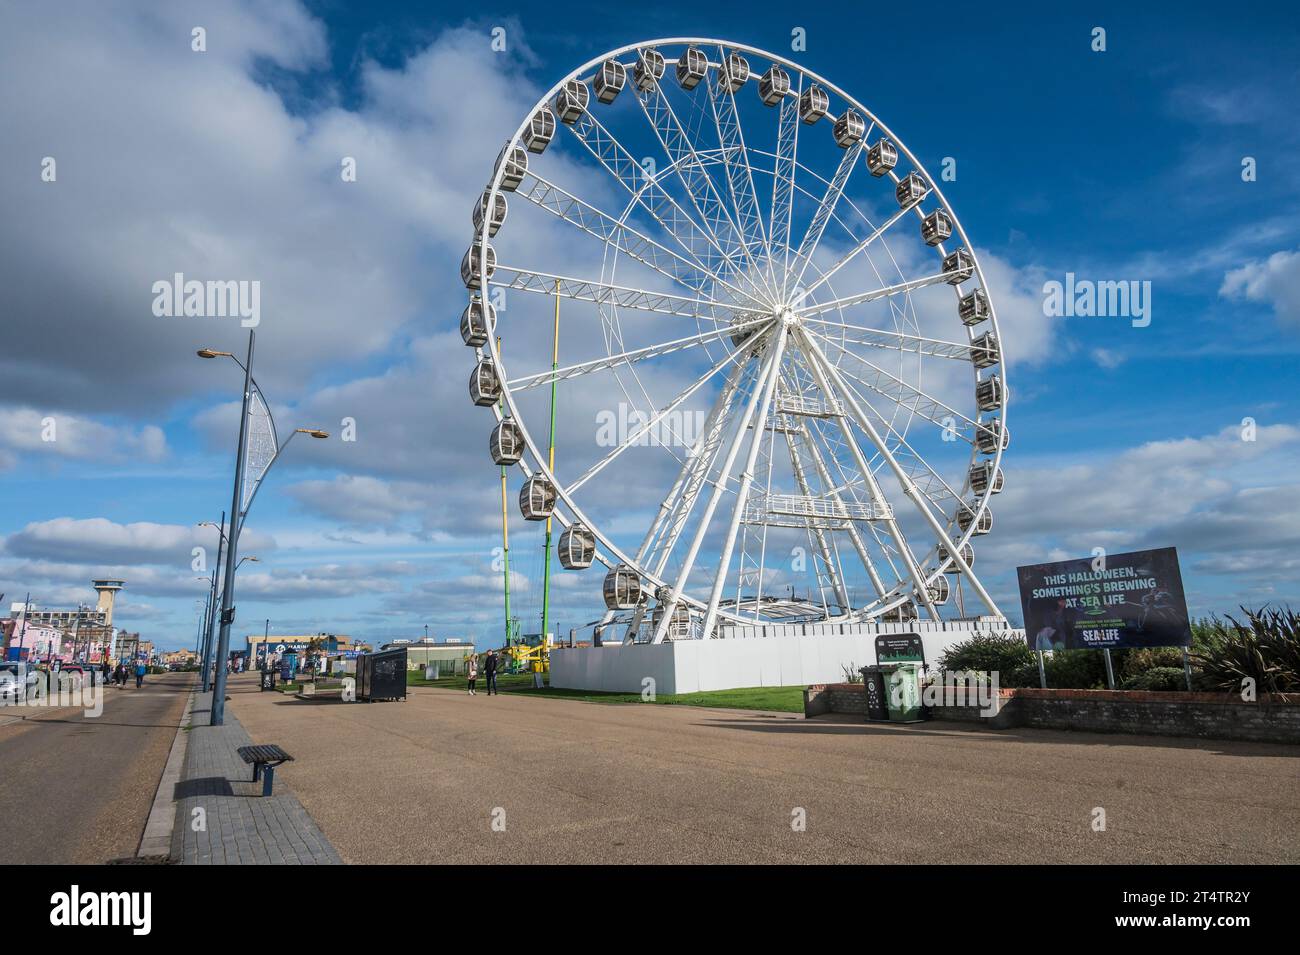 The image is of the typical English seaside holiday resort town of Great Yarmouth looking along the promenade with its various tourist attractions Stock Photo